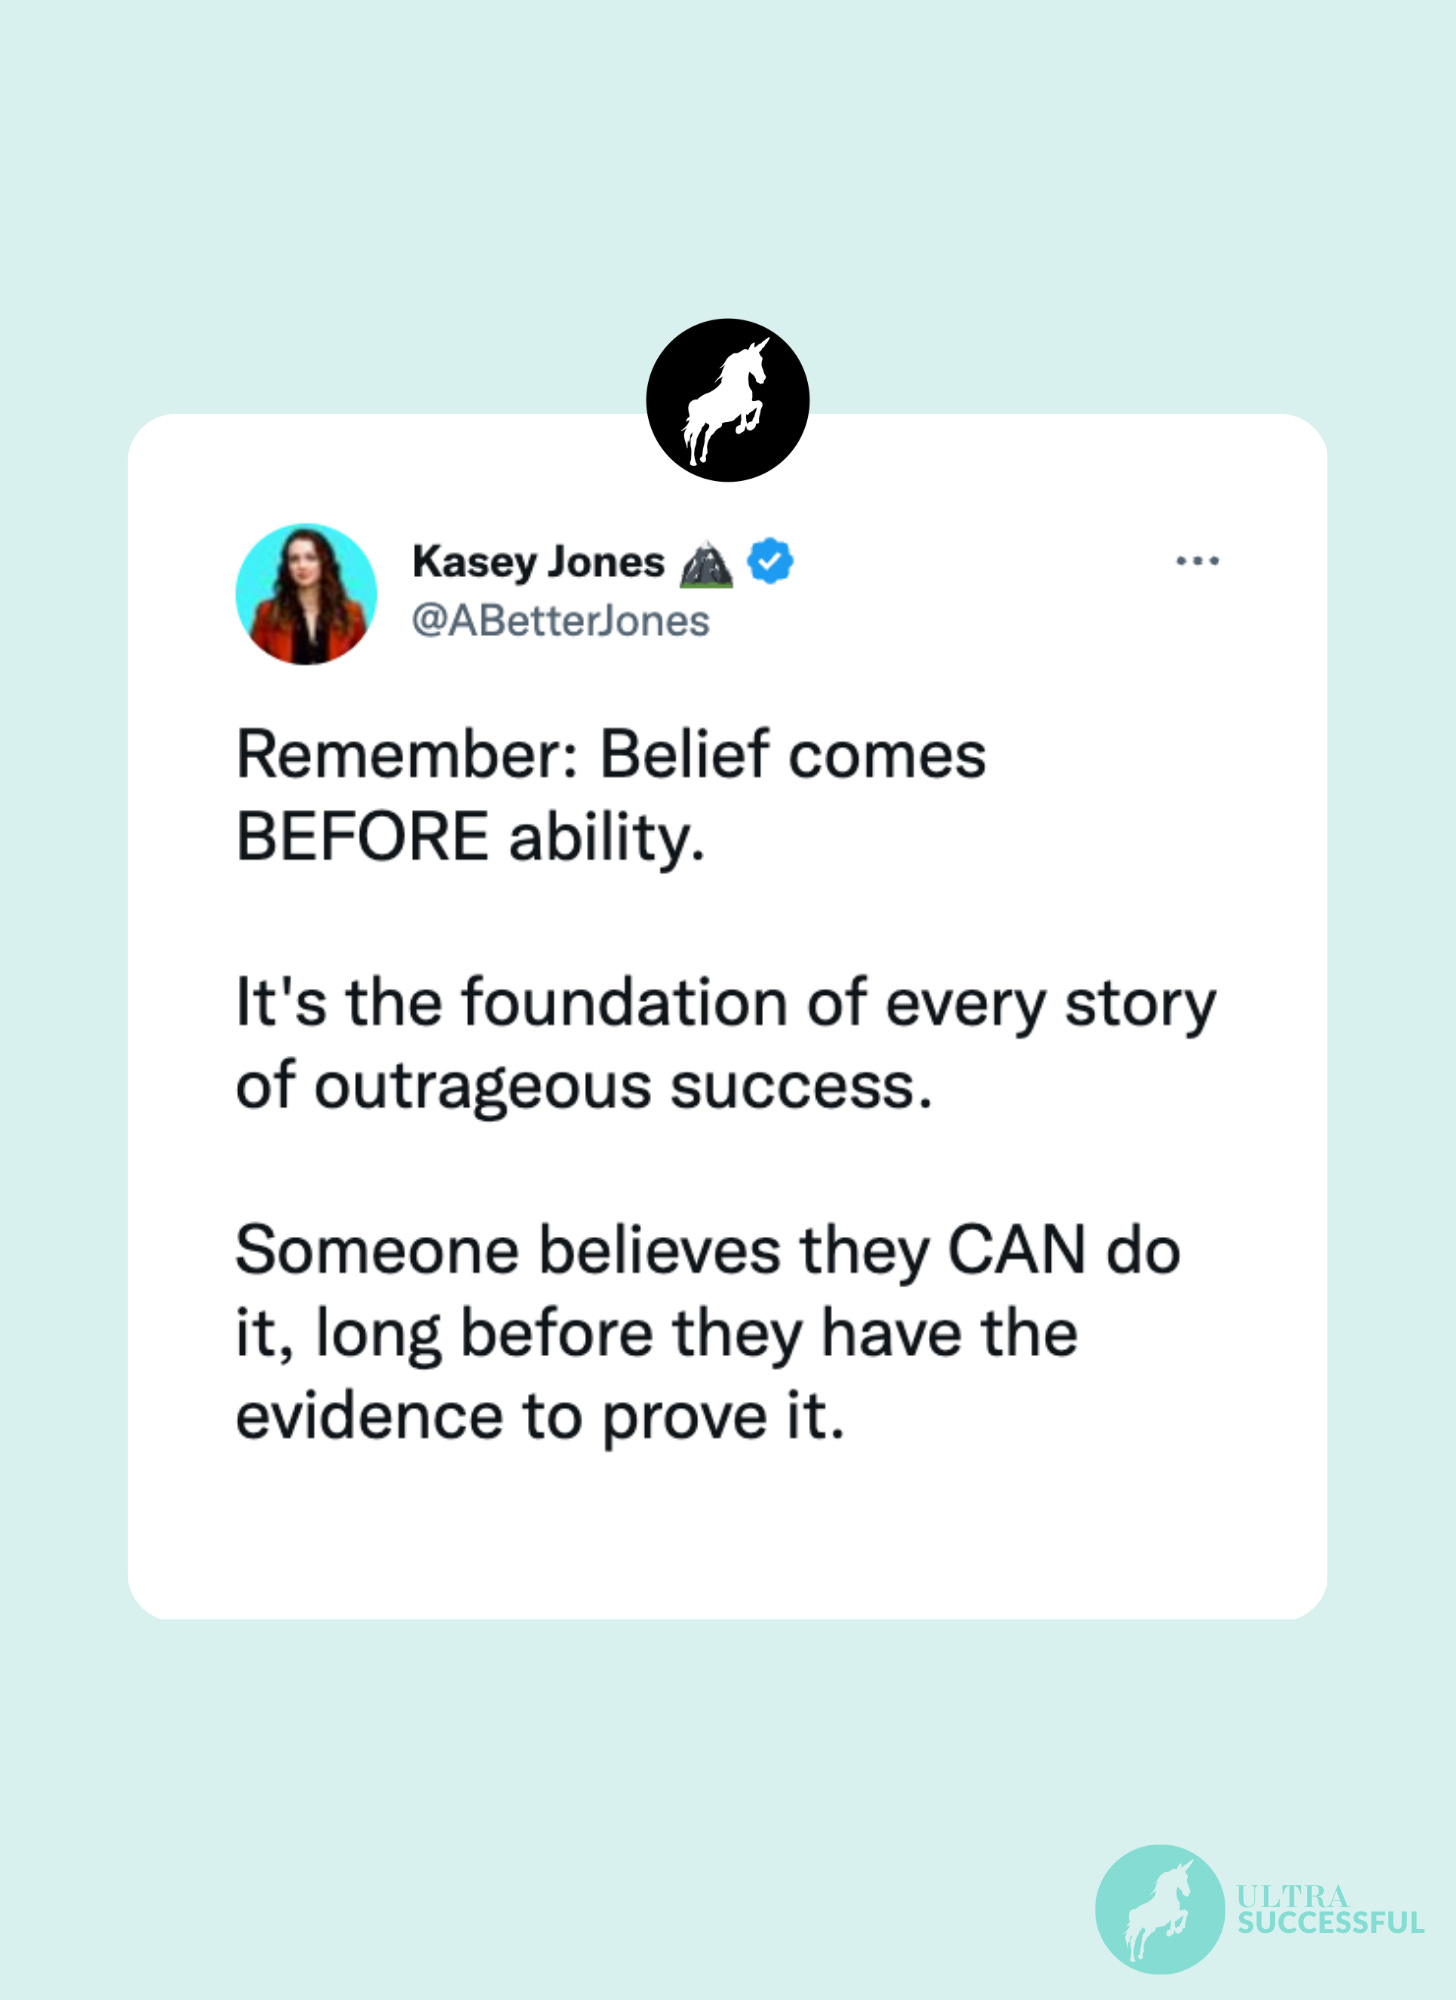 @ABetterJones: Remember: Belief comes BEFORE ability.   It's the foundation of every story of outrageous success.   Someone believes they CAN do it, long before they have the evidence to prove it.